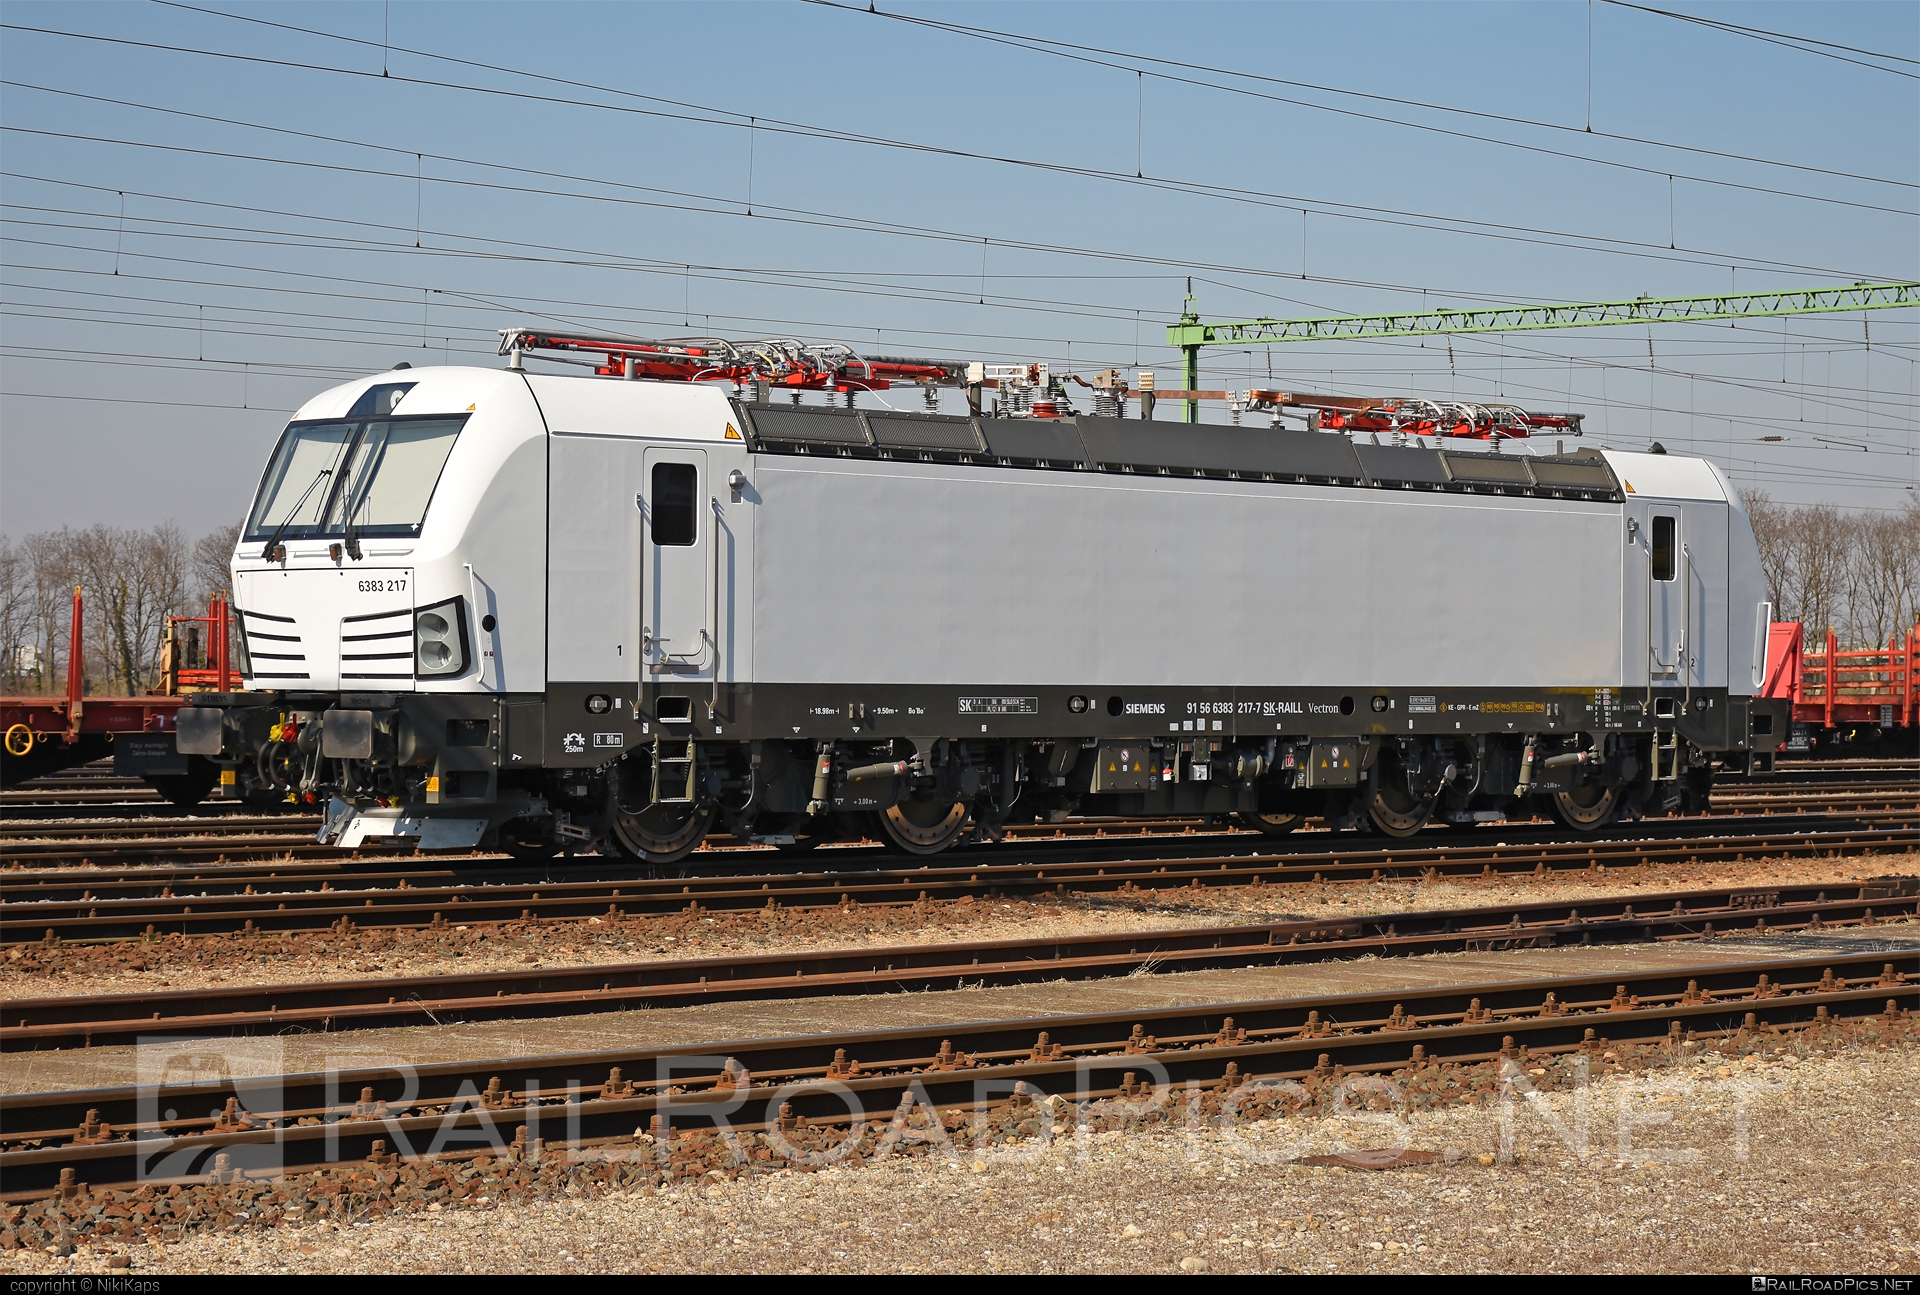 Siemens Vectron MS - 6383 217 operated by CENTRAL RAILWAYS s.r.o. #RollingStockLease #RollingStockLeaseSro #centralrailways #crw #raill #siemens #siemensVectron #siemensVectronMS #vectron #vectronMS